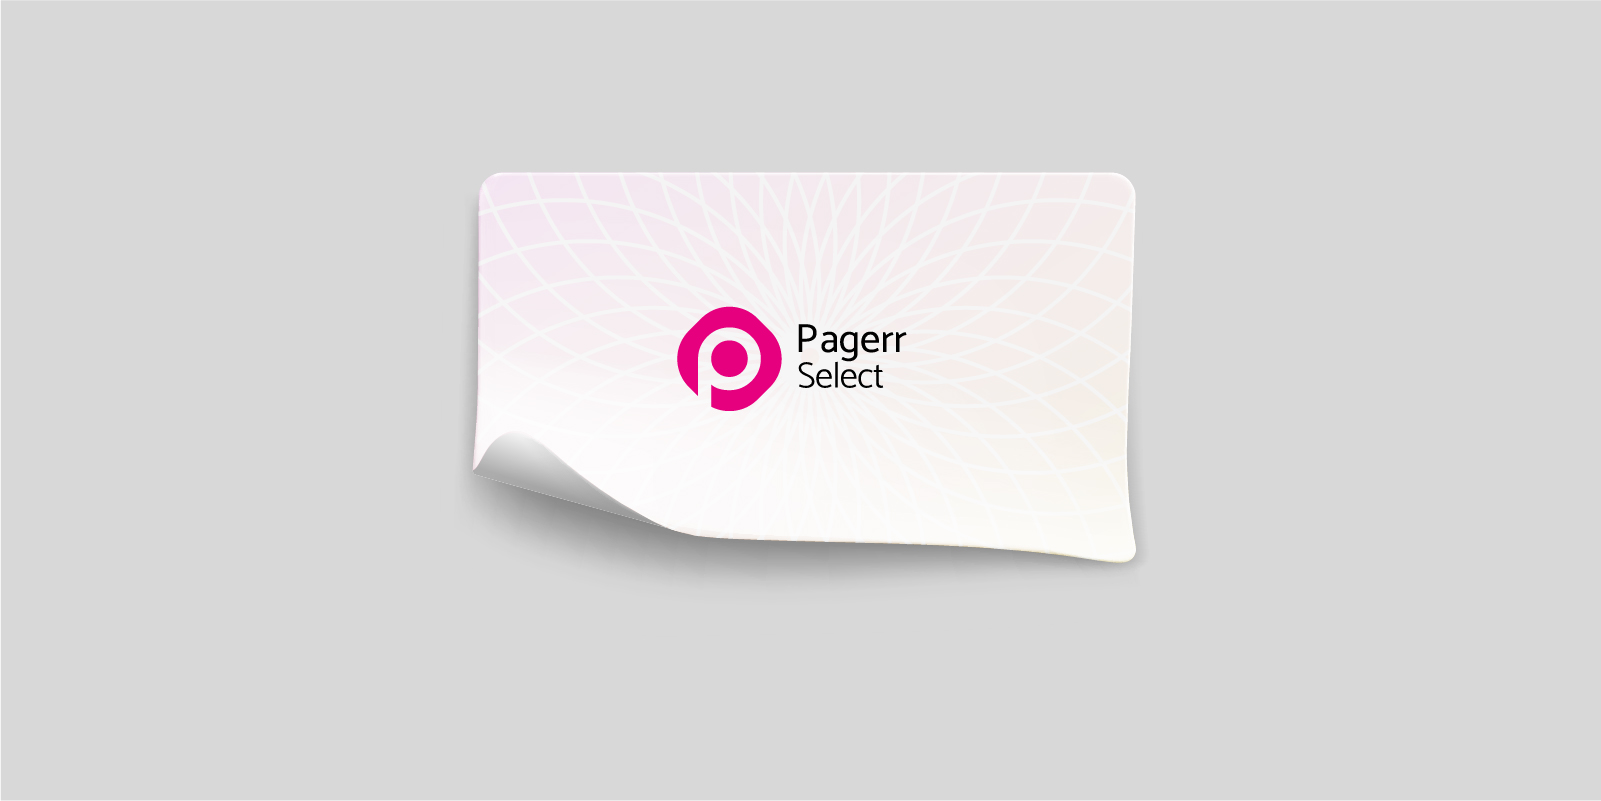 Sheet stickers in Mandurah - Print with Pagerr